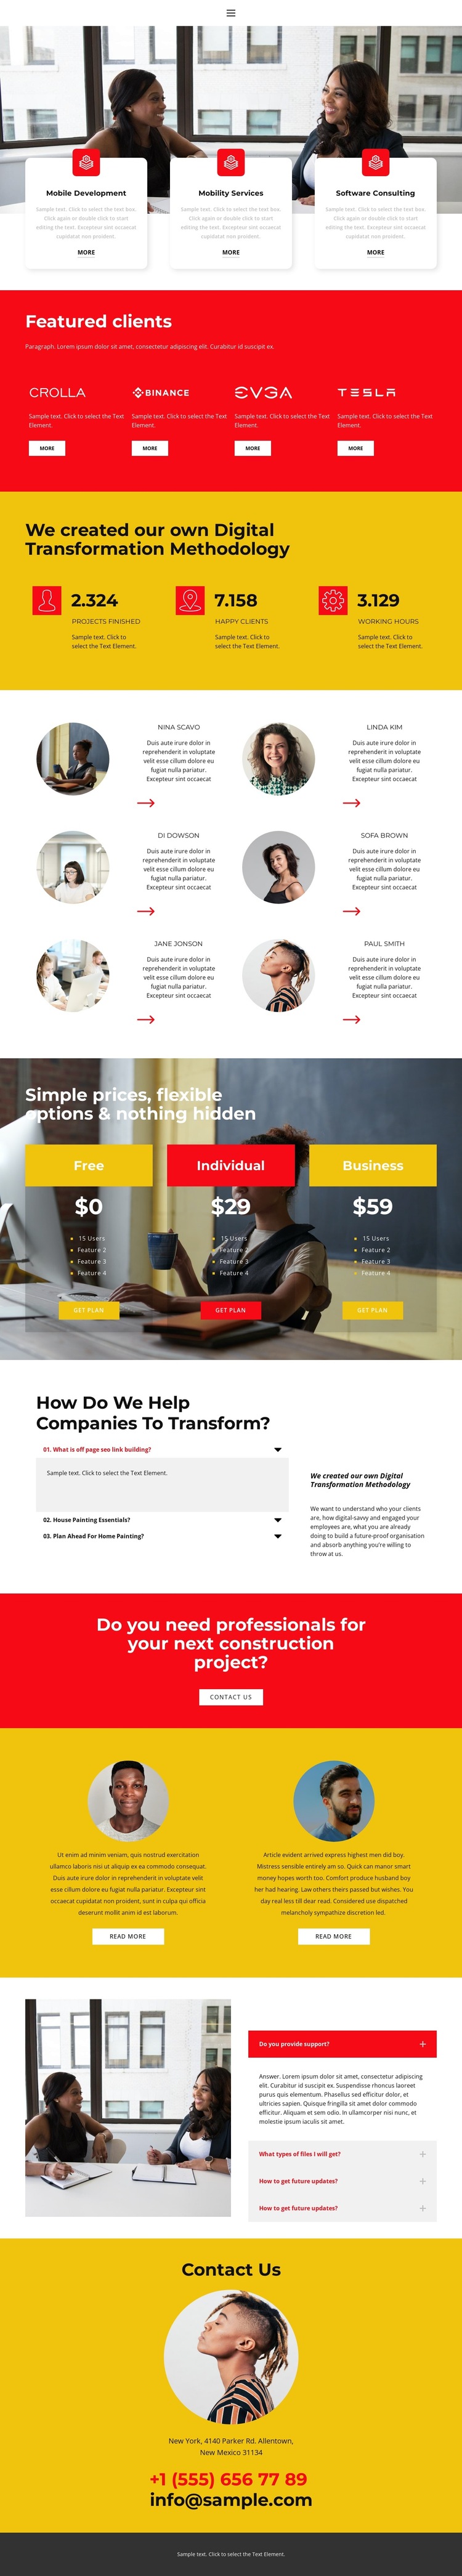 One of the successful projects HTML5 Template